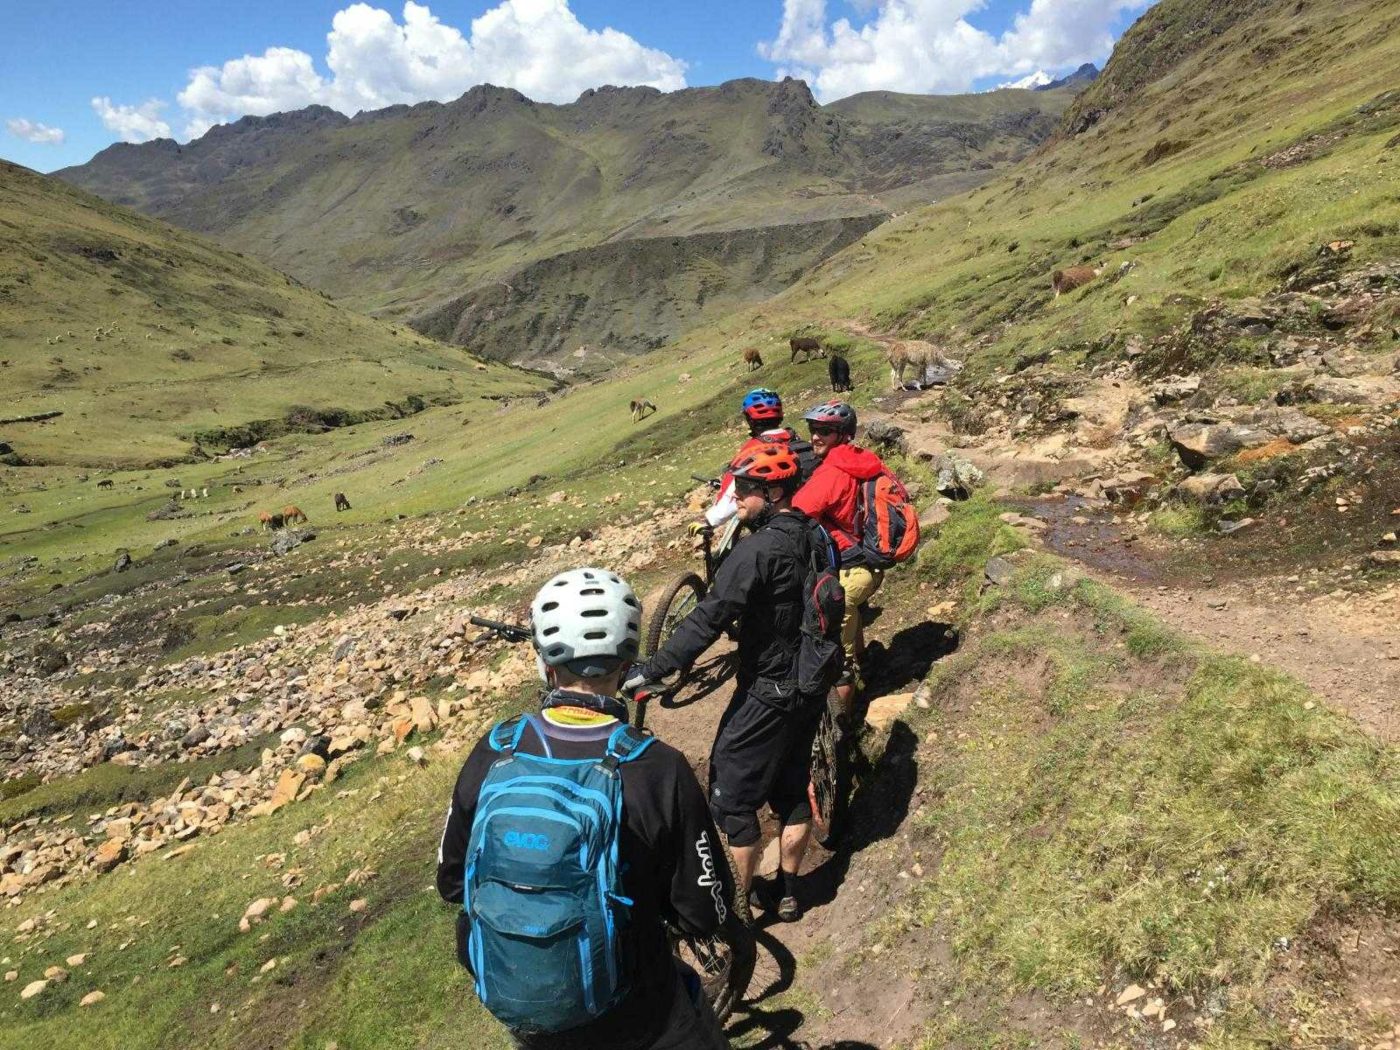 4 people walking their mountain bikes on a narrow rocky mountain path surrounded by grassy hills and alpacas dotting the hillside